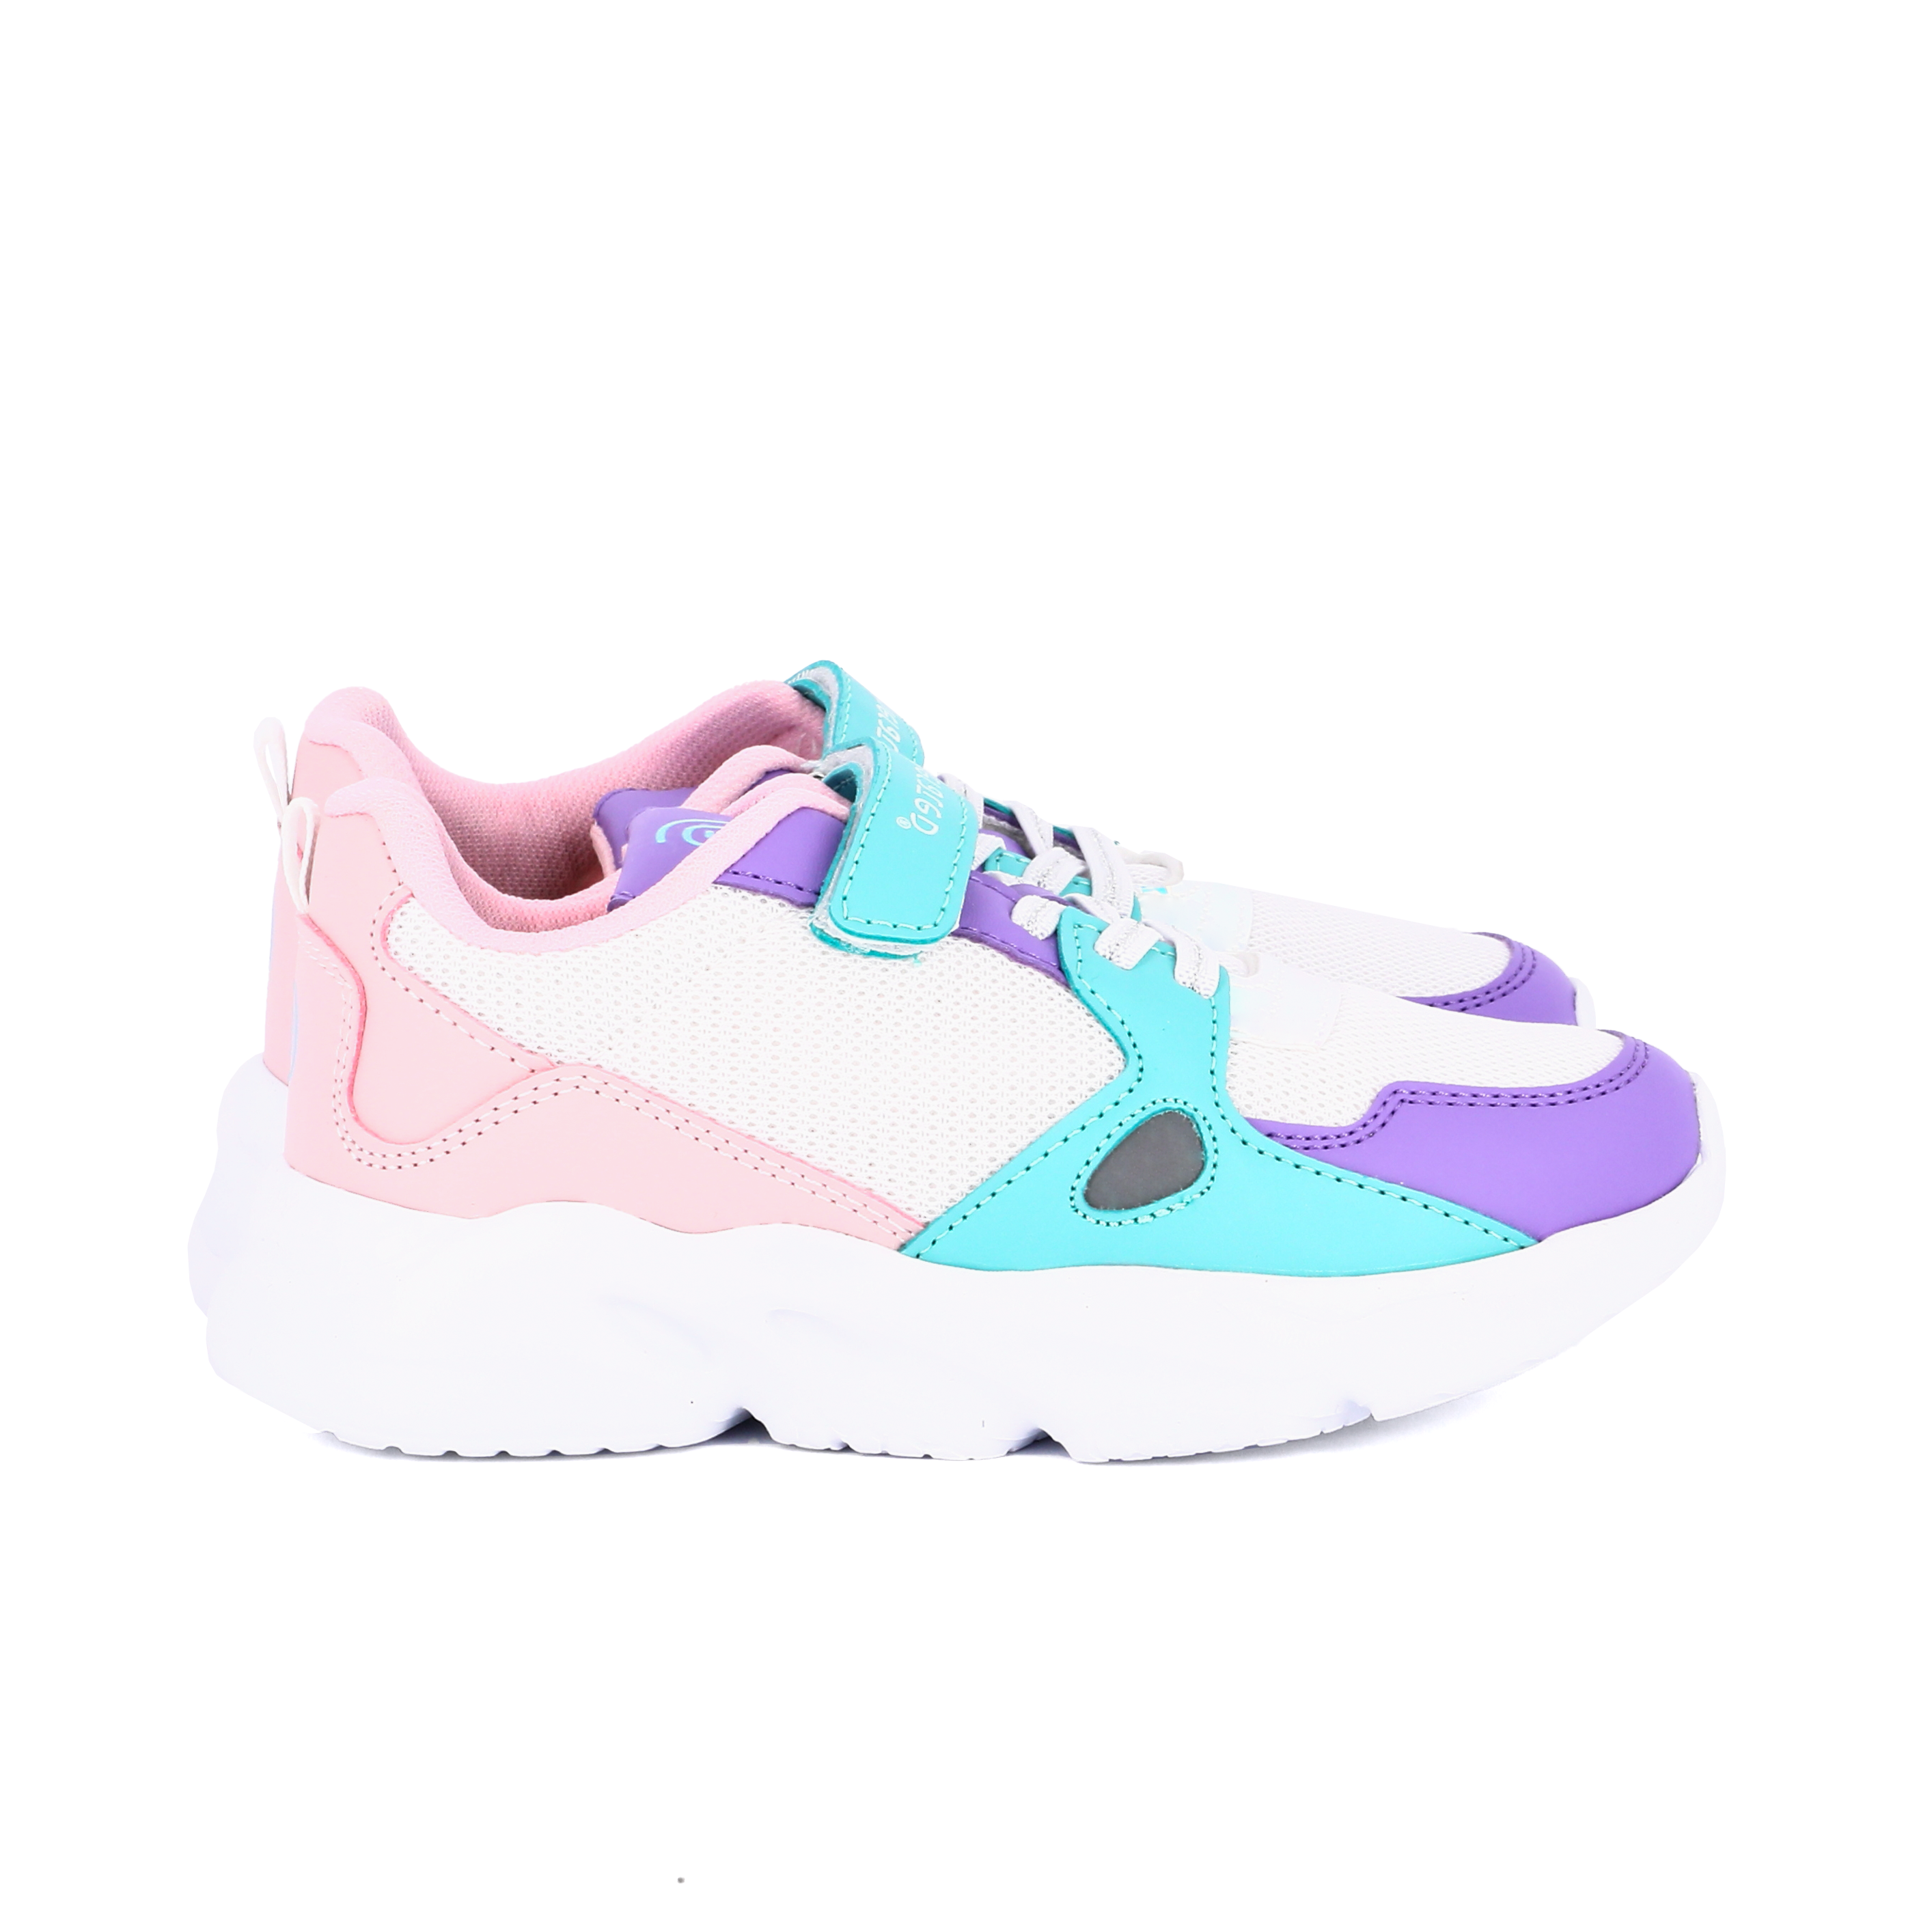 Fashion colored sneakers